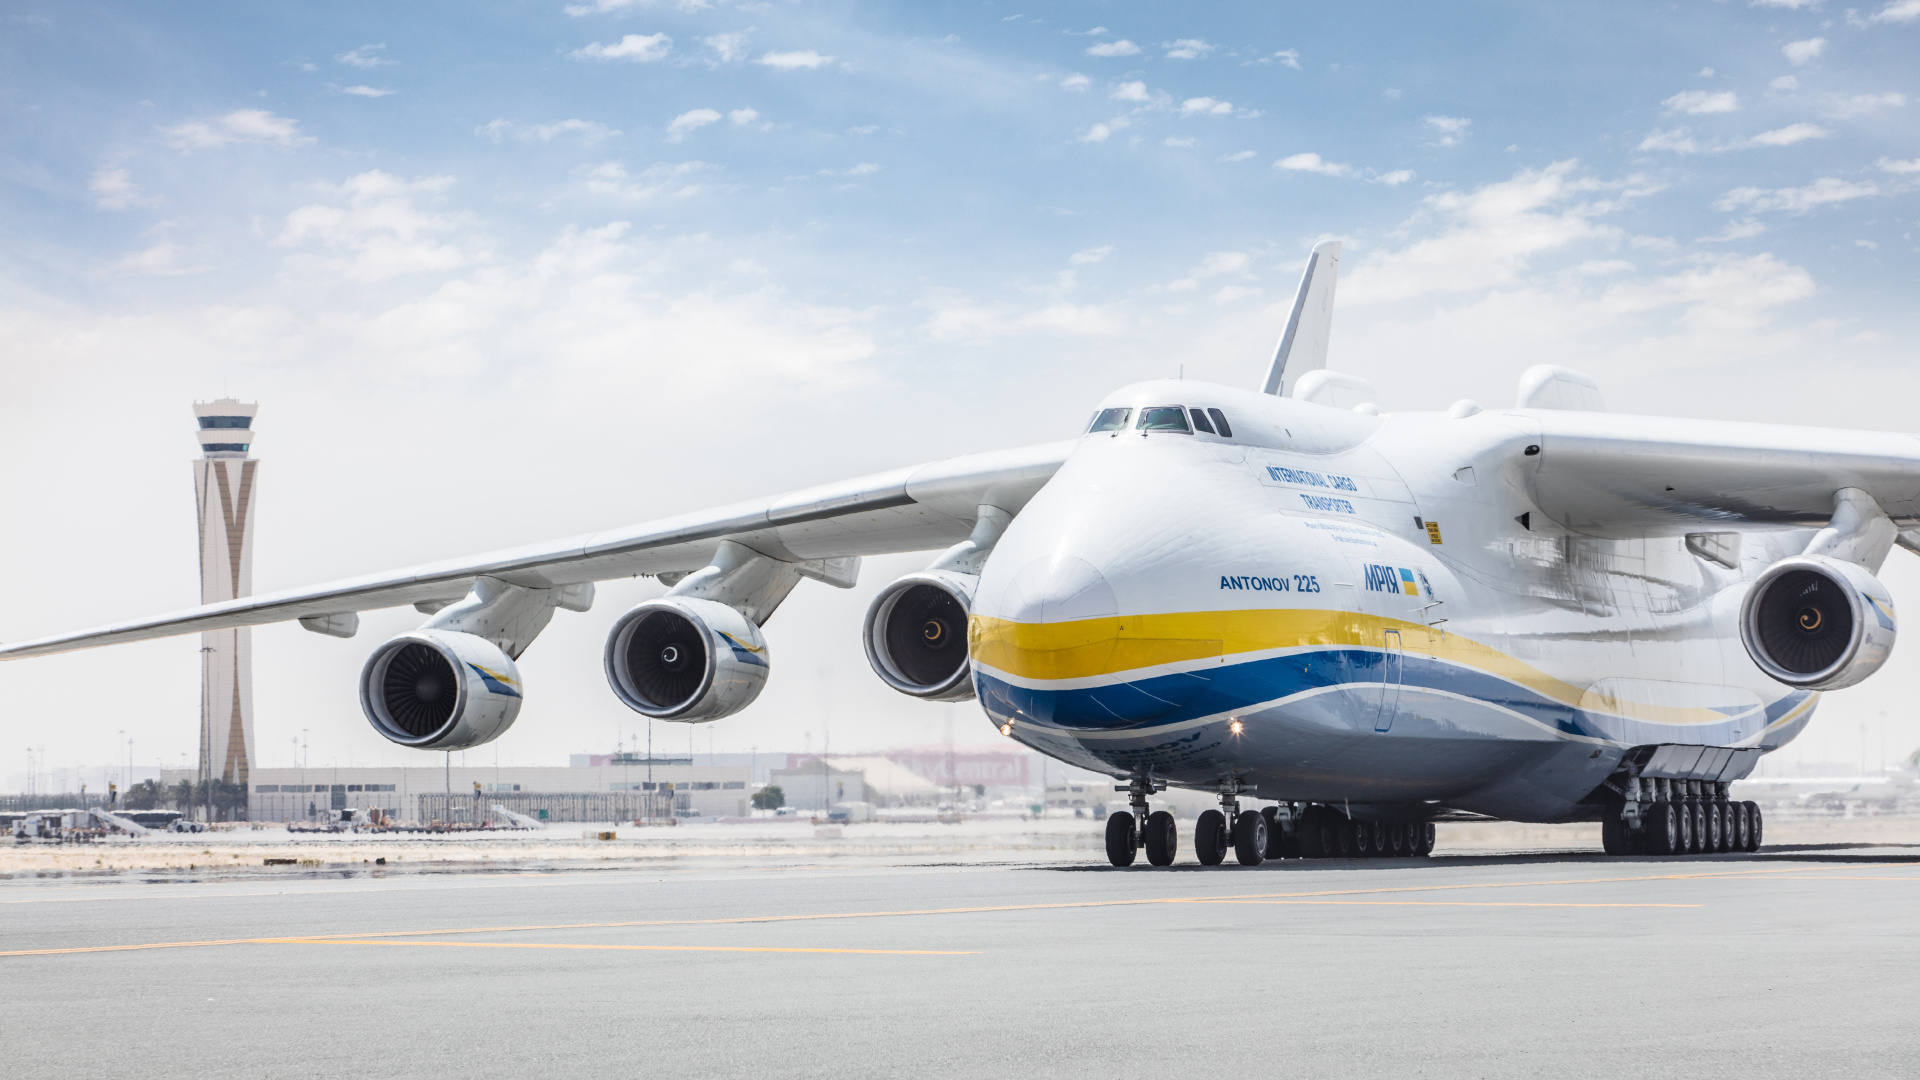 Aircraft, Airplane, Cargo Aircraft, Airliner, Antonov. Wallpaper in 1920x1080 Resolution